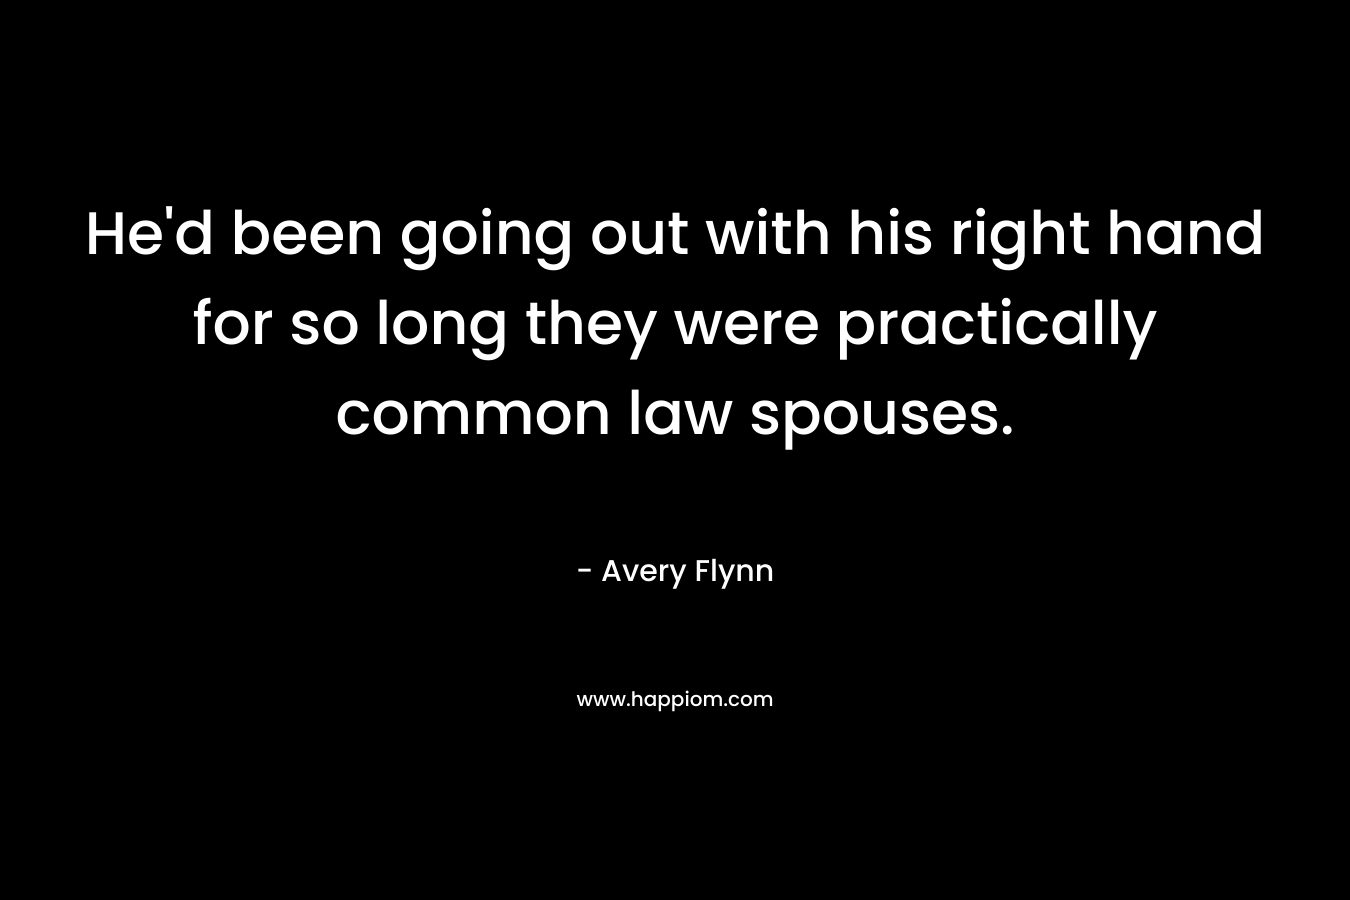 He’d been going out with his right hand for so long they were practically common law spouses. – Avery Flynn